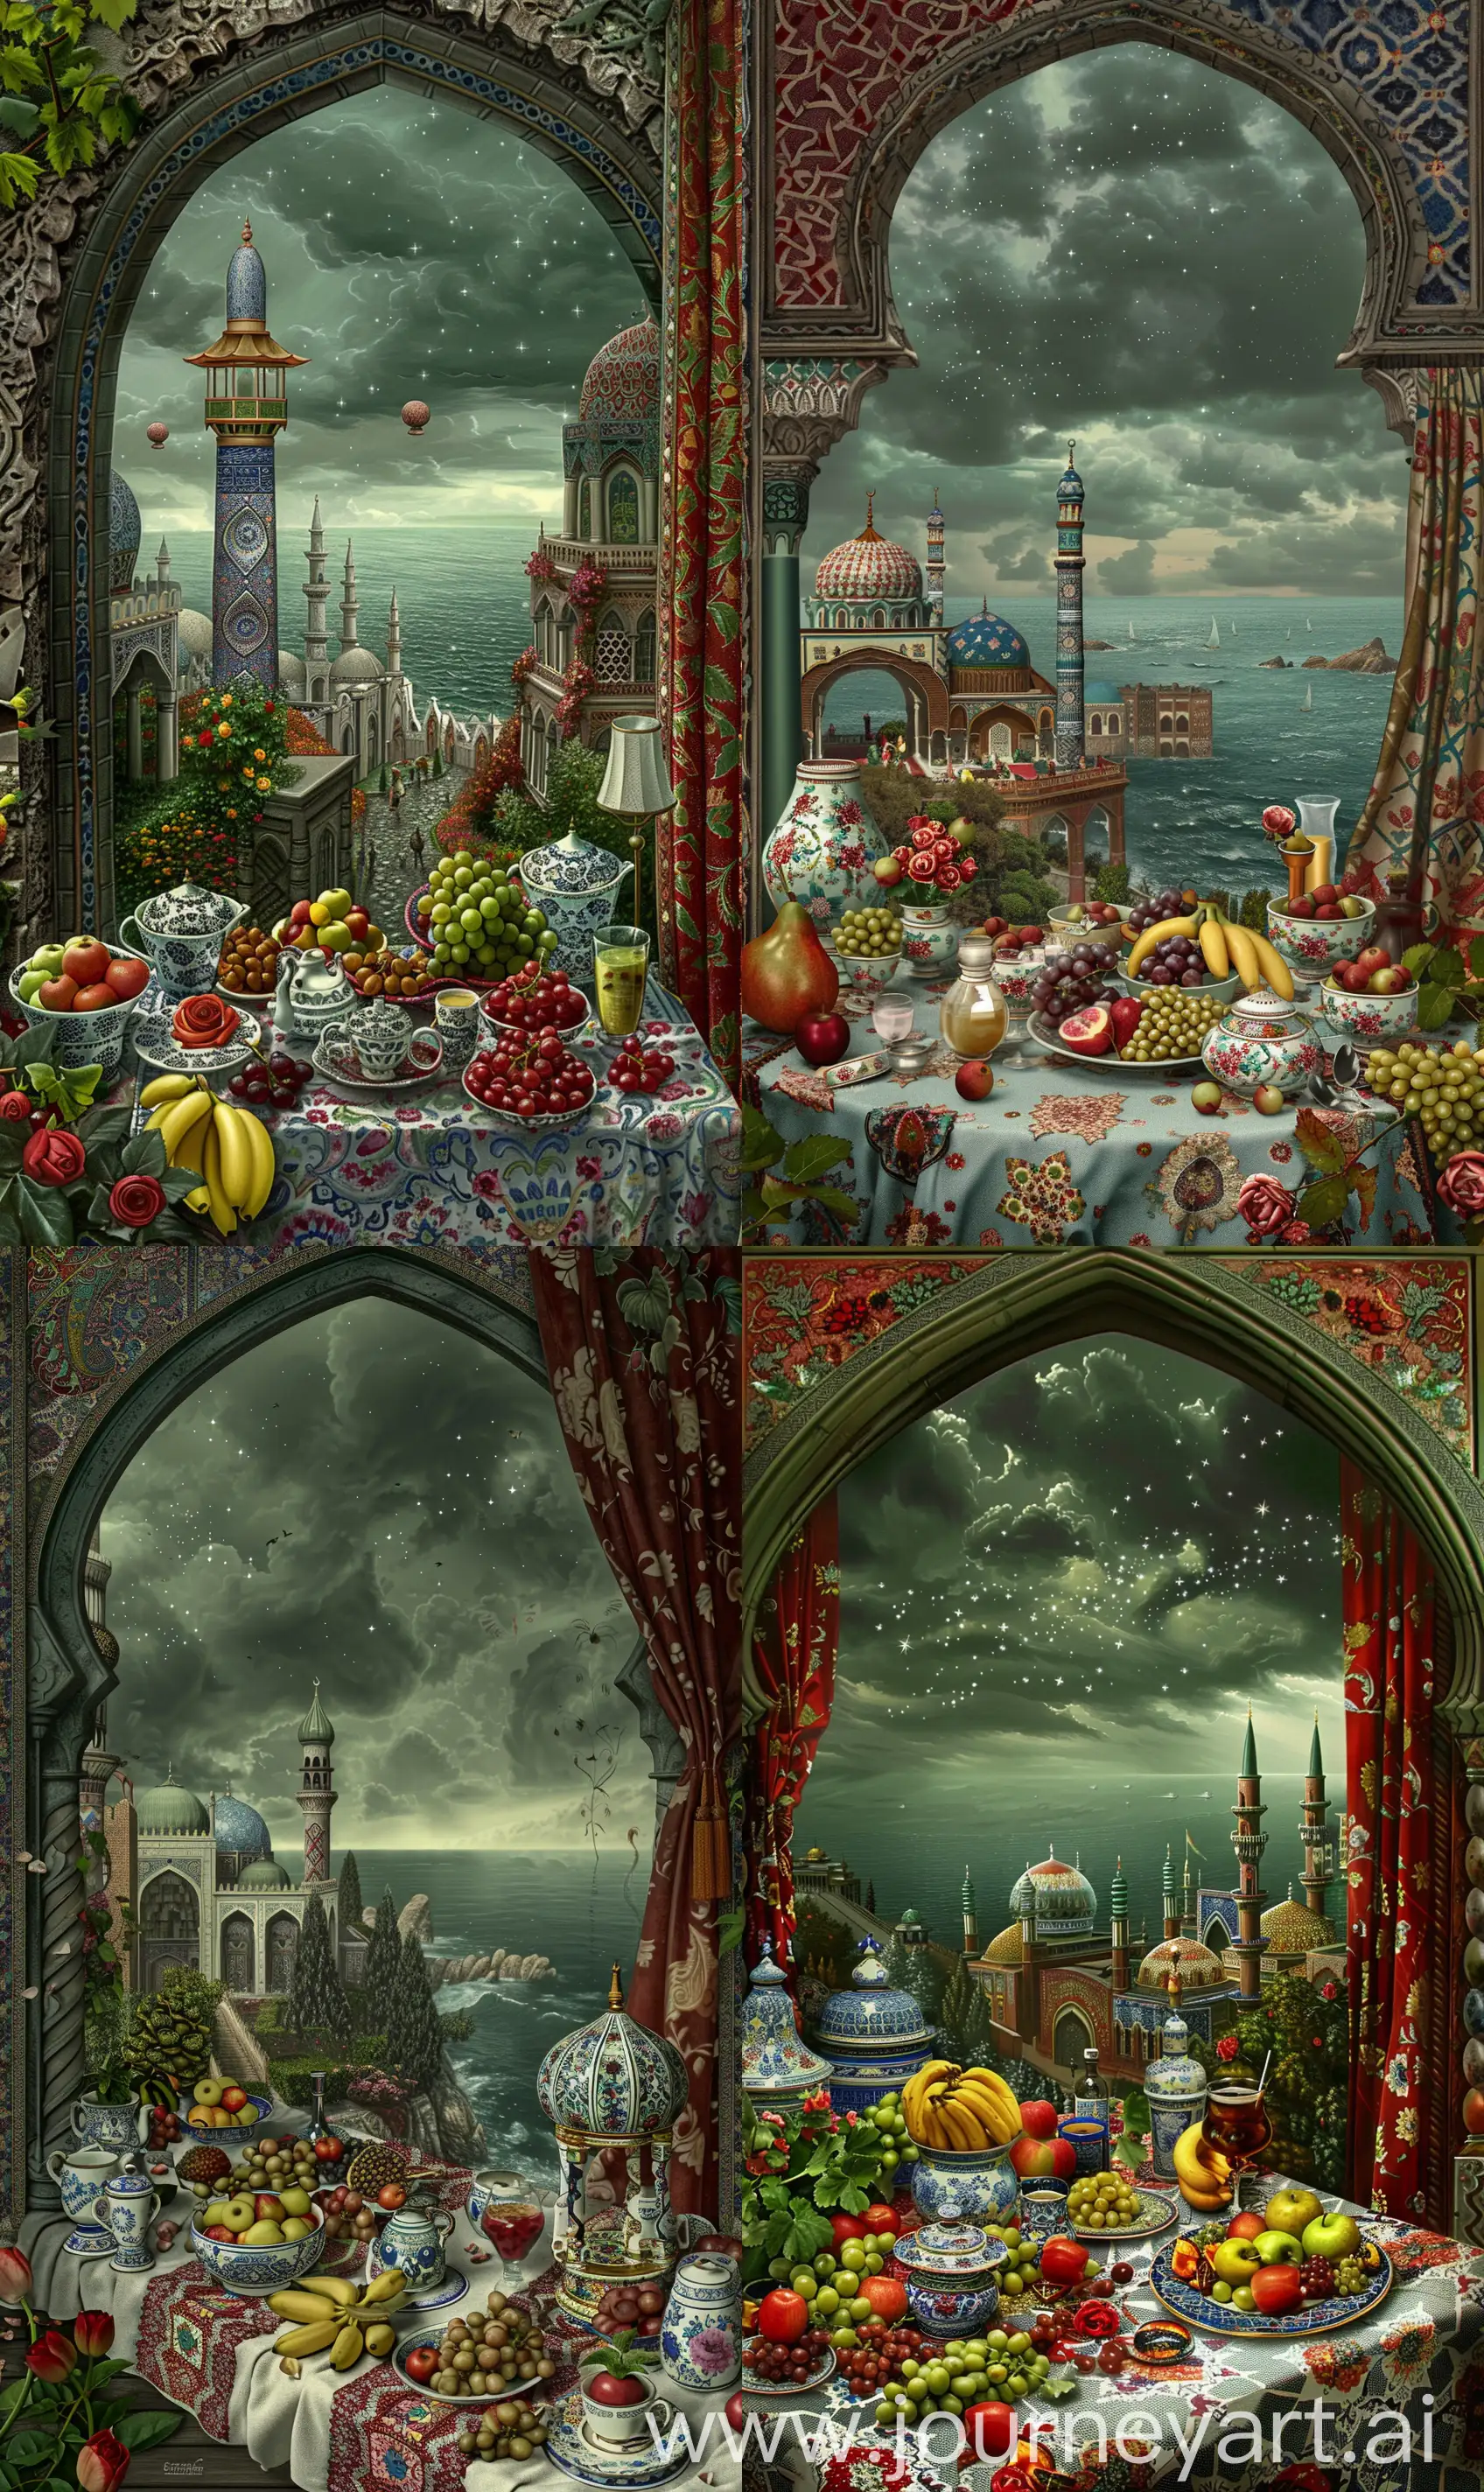 Renaissance-Style-Fantasy-Art-Timurid-Arch-Overlooking-Islamic-Architecture-and-Ornate-Table-Setting